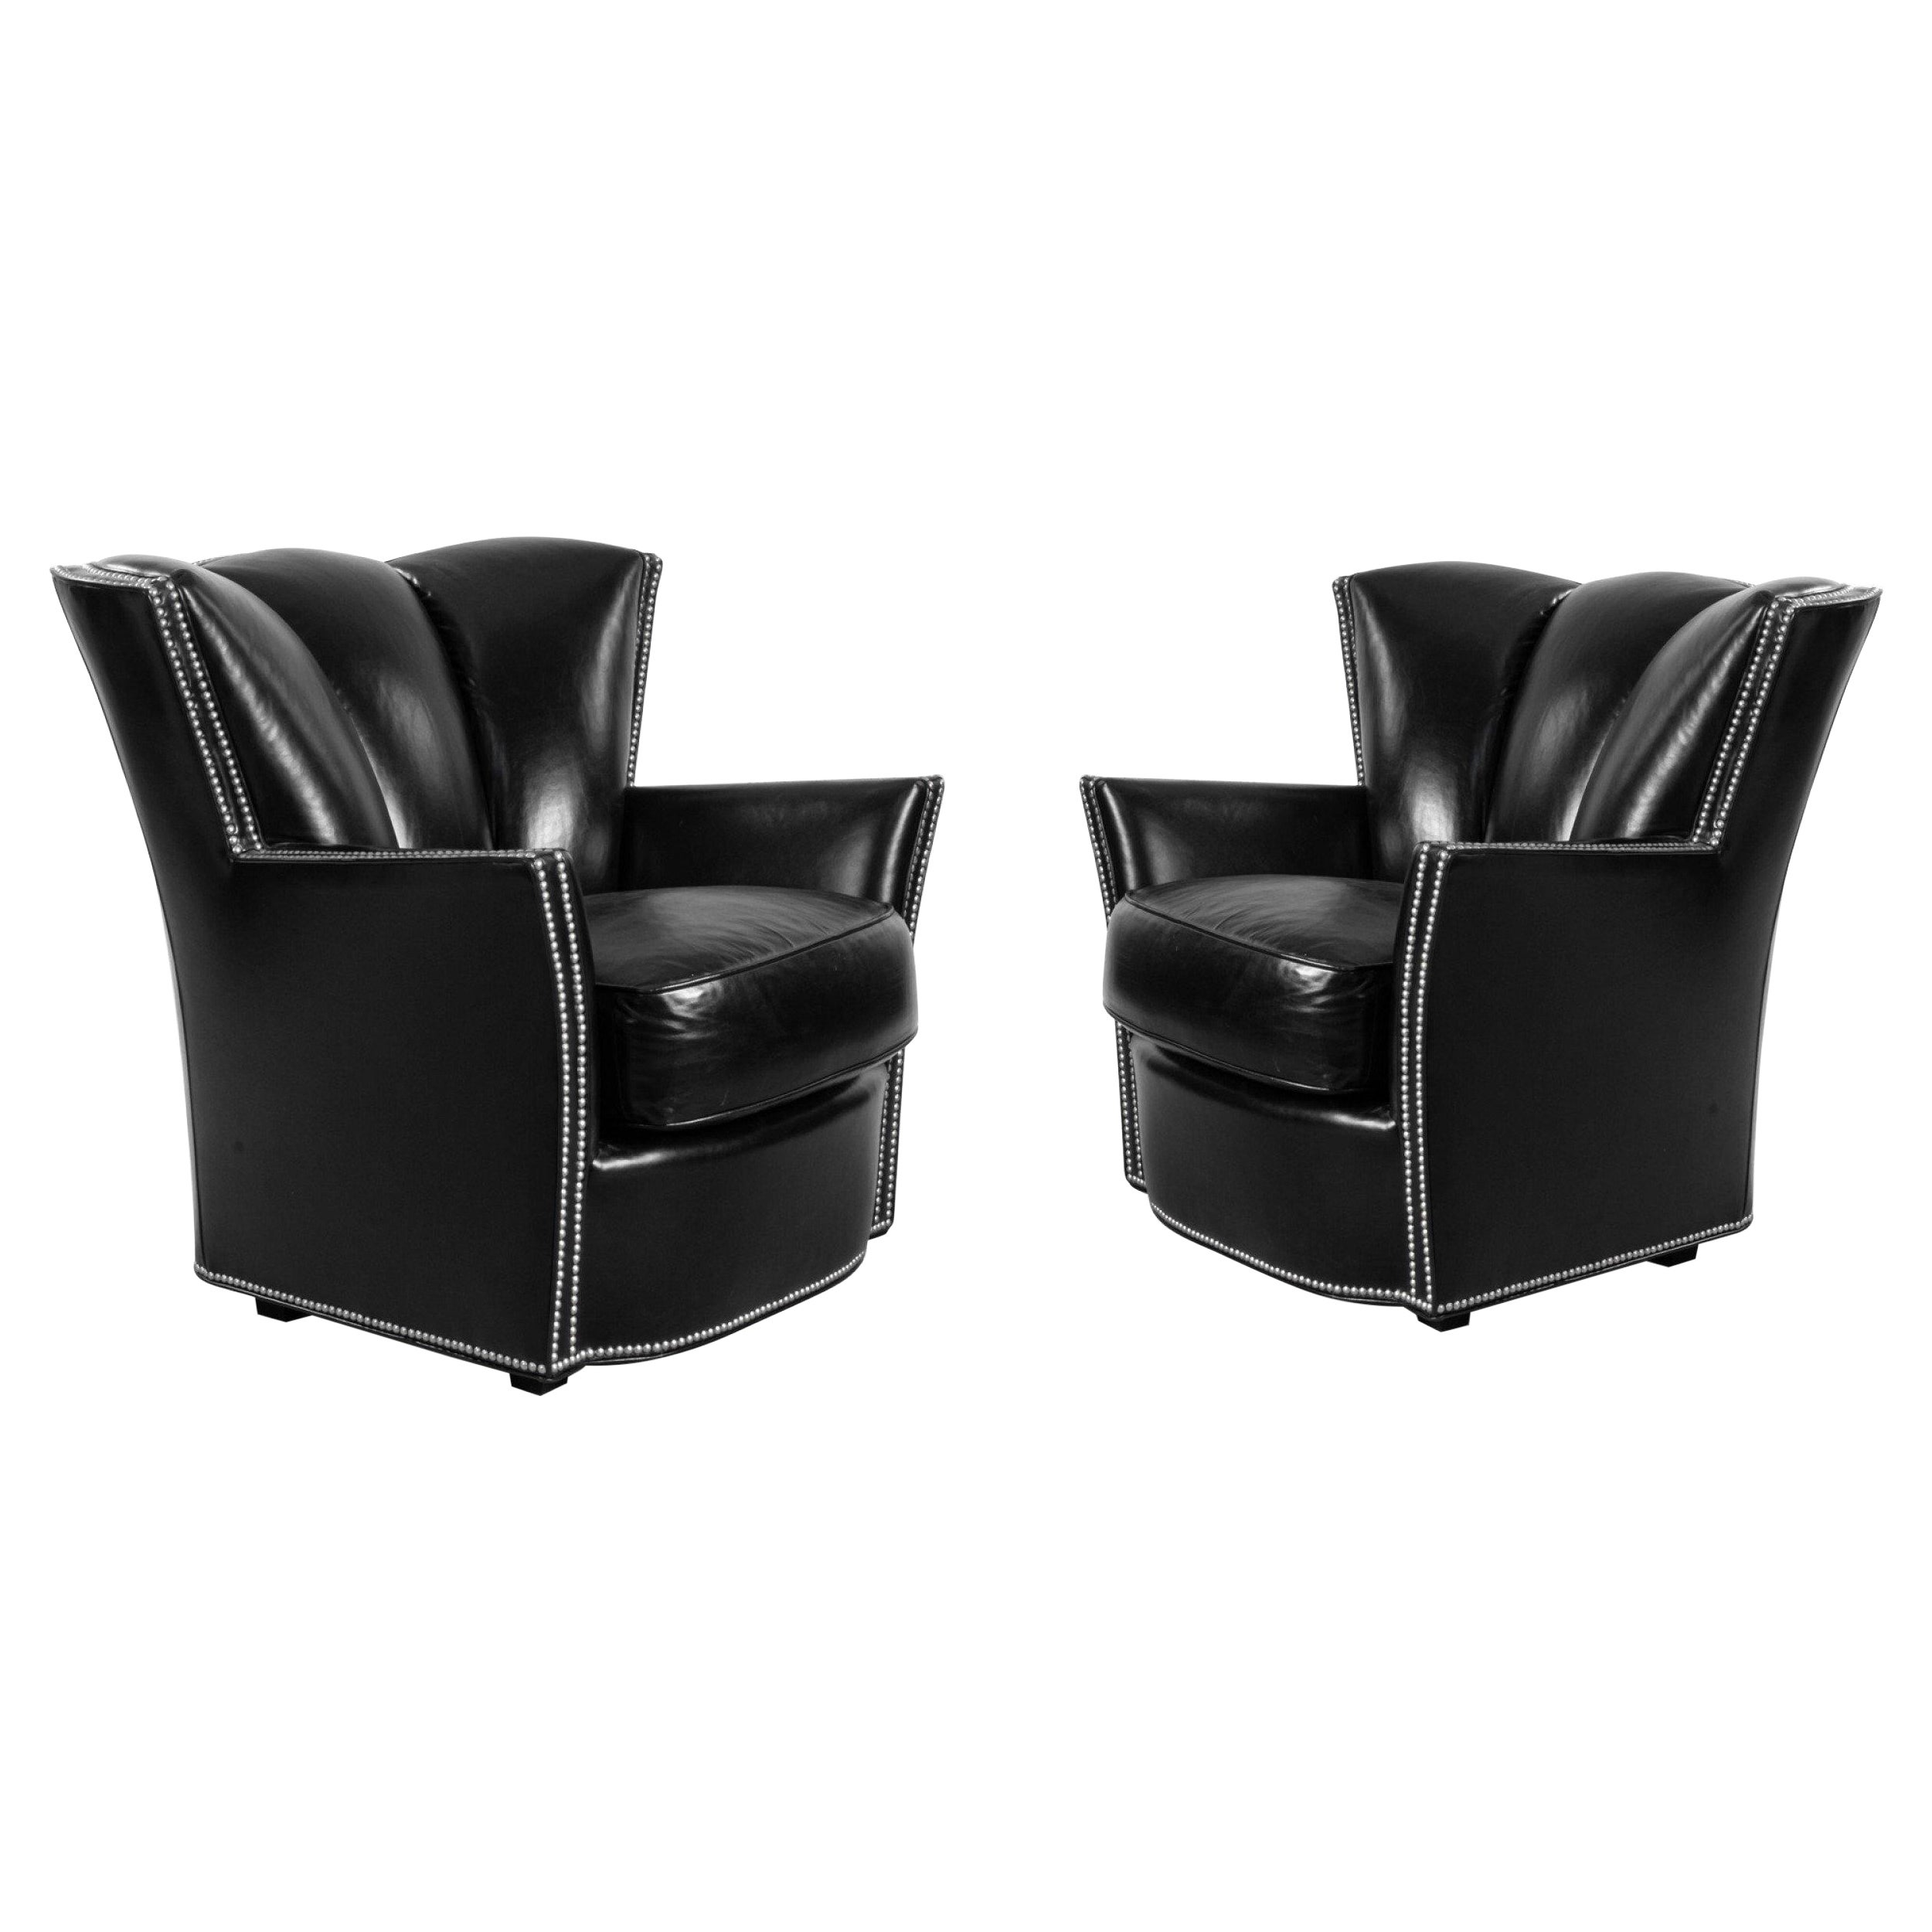 Pair of Contemporary Black Leather Studded Club Chairs